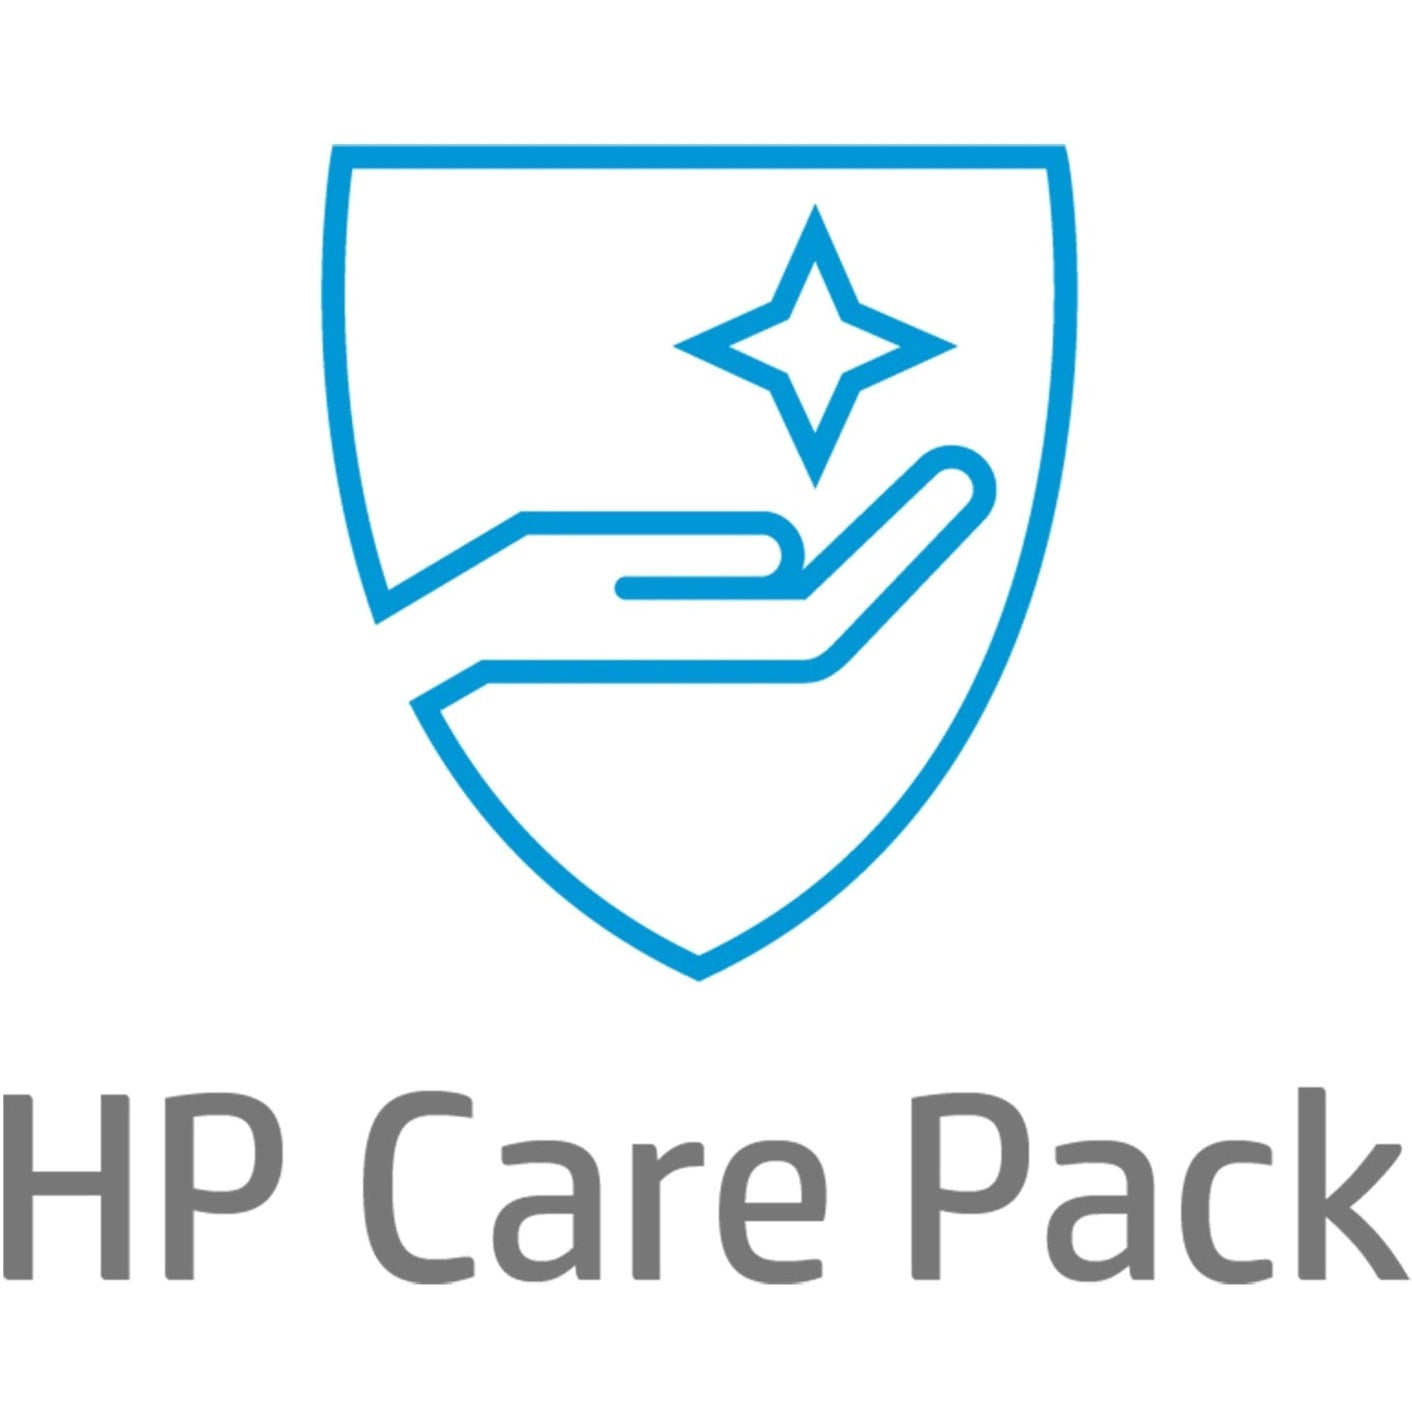 HP Care Pack - Extended Service - 3 Year - Service (UB0E4E)